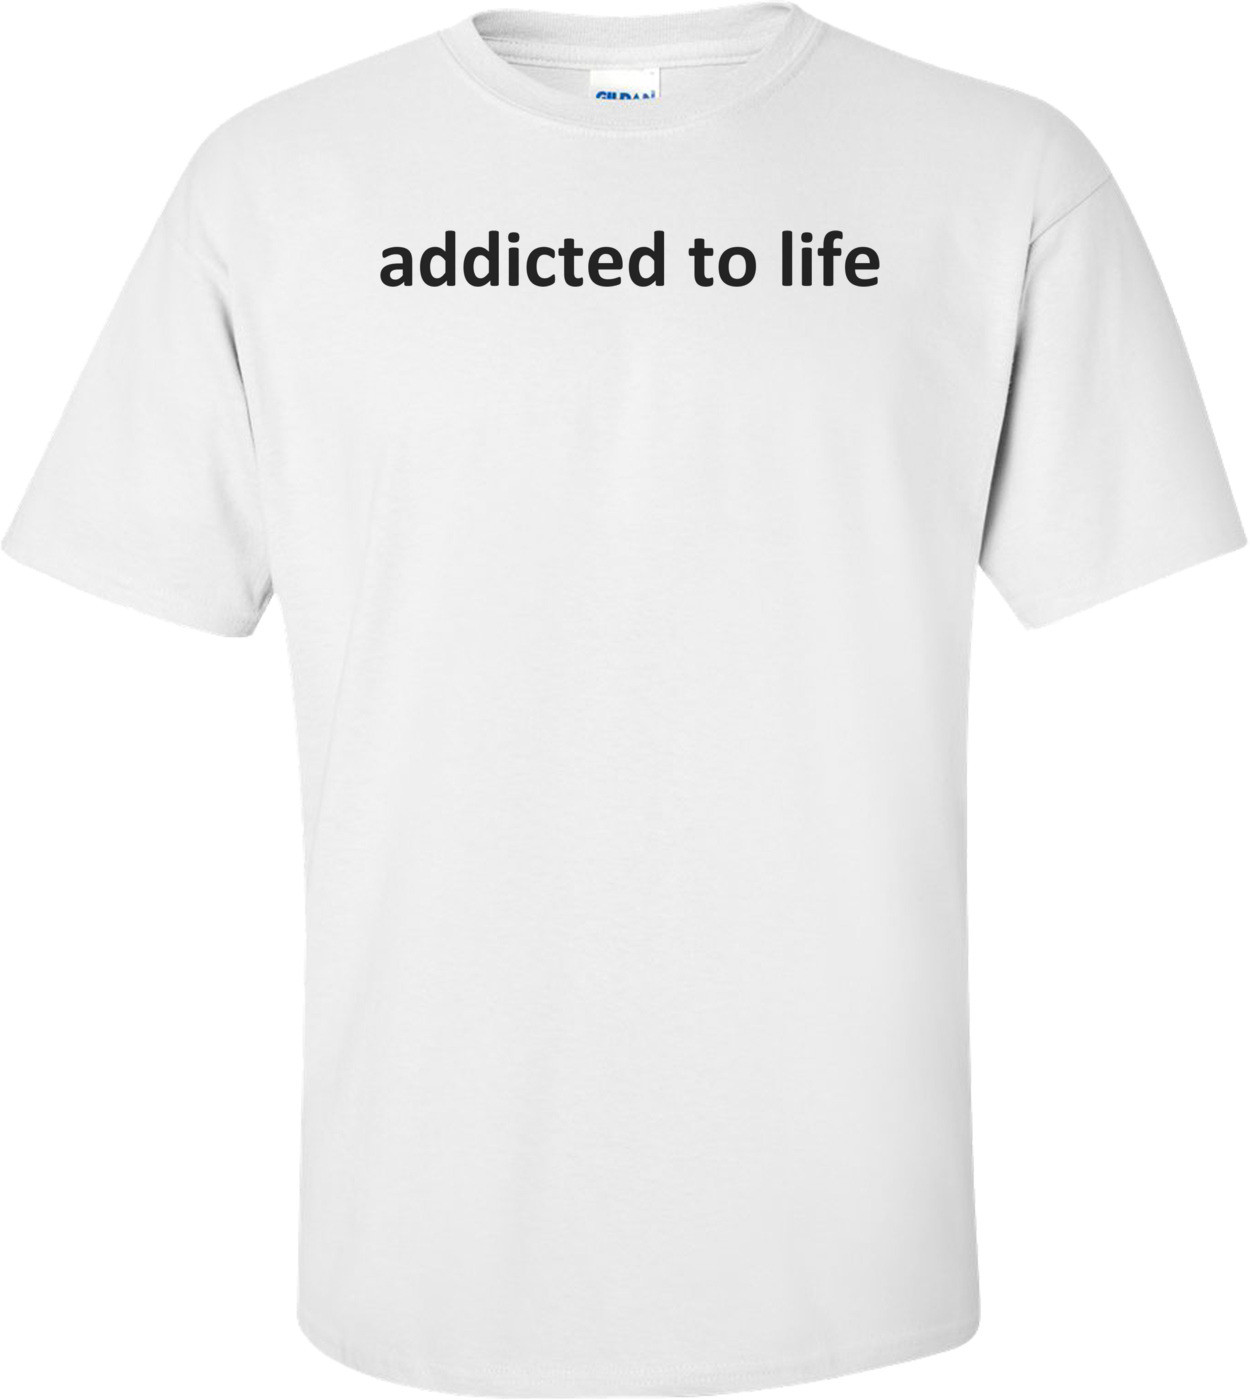 addicted to life